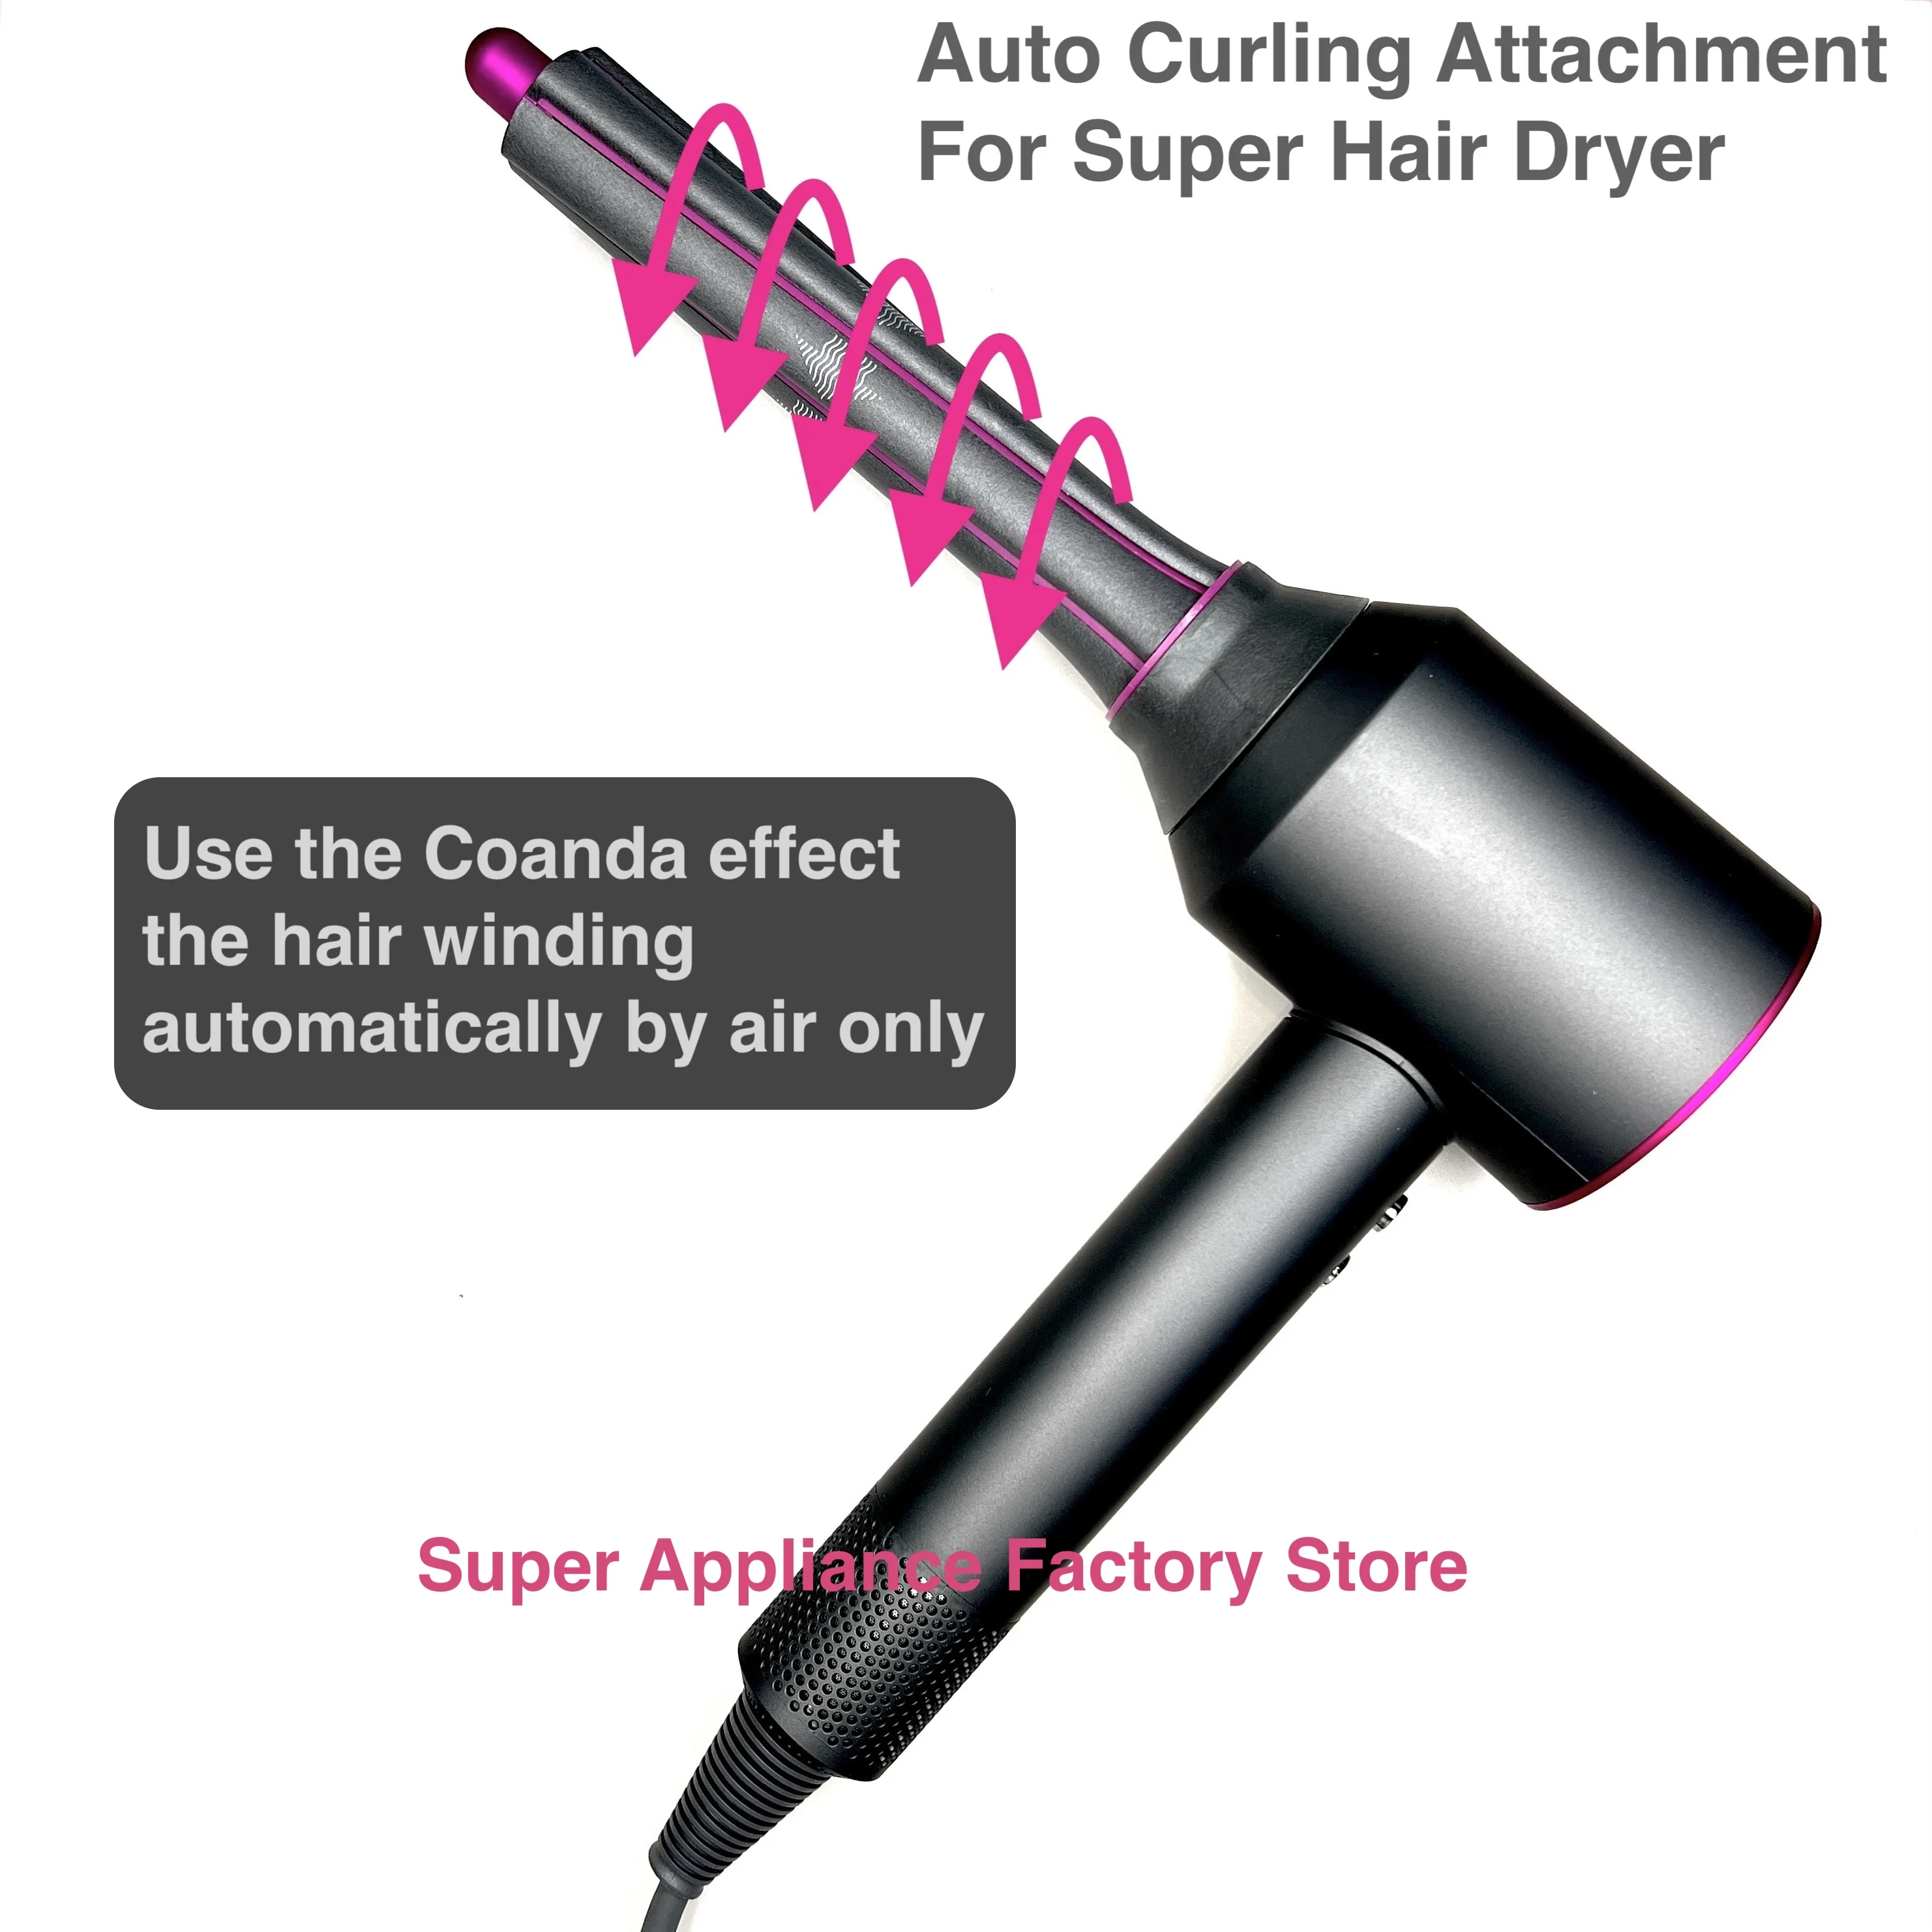 For Dyson Curling Attachment For Dyson Hair Dryer Supersonic Curling Nozzle For Super Hair Dryer Attachments